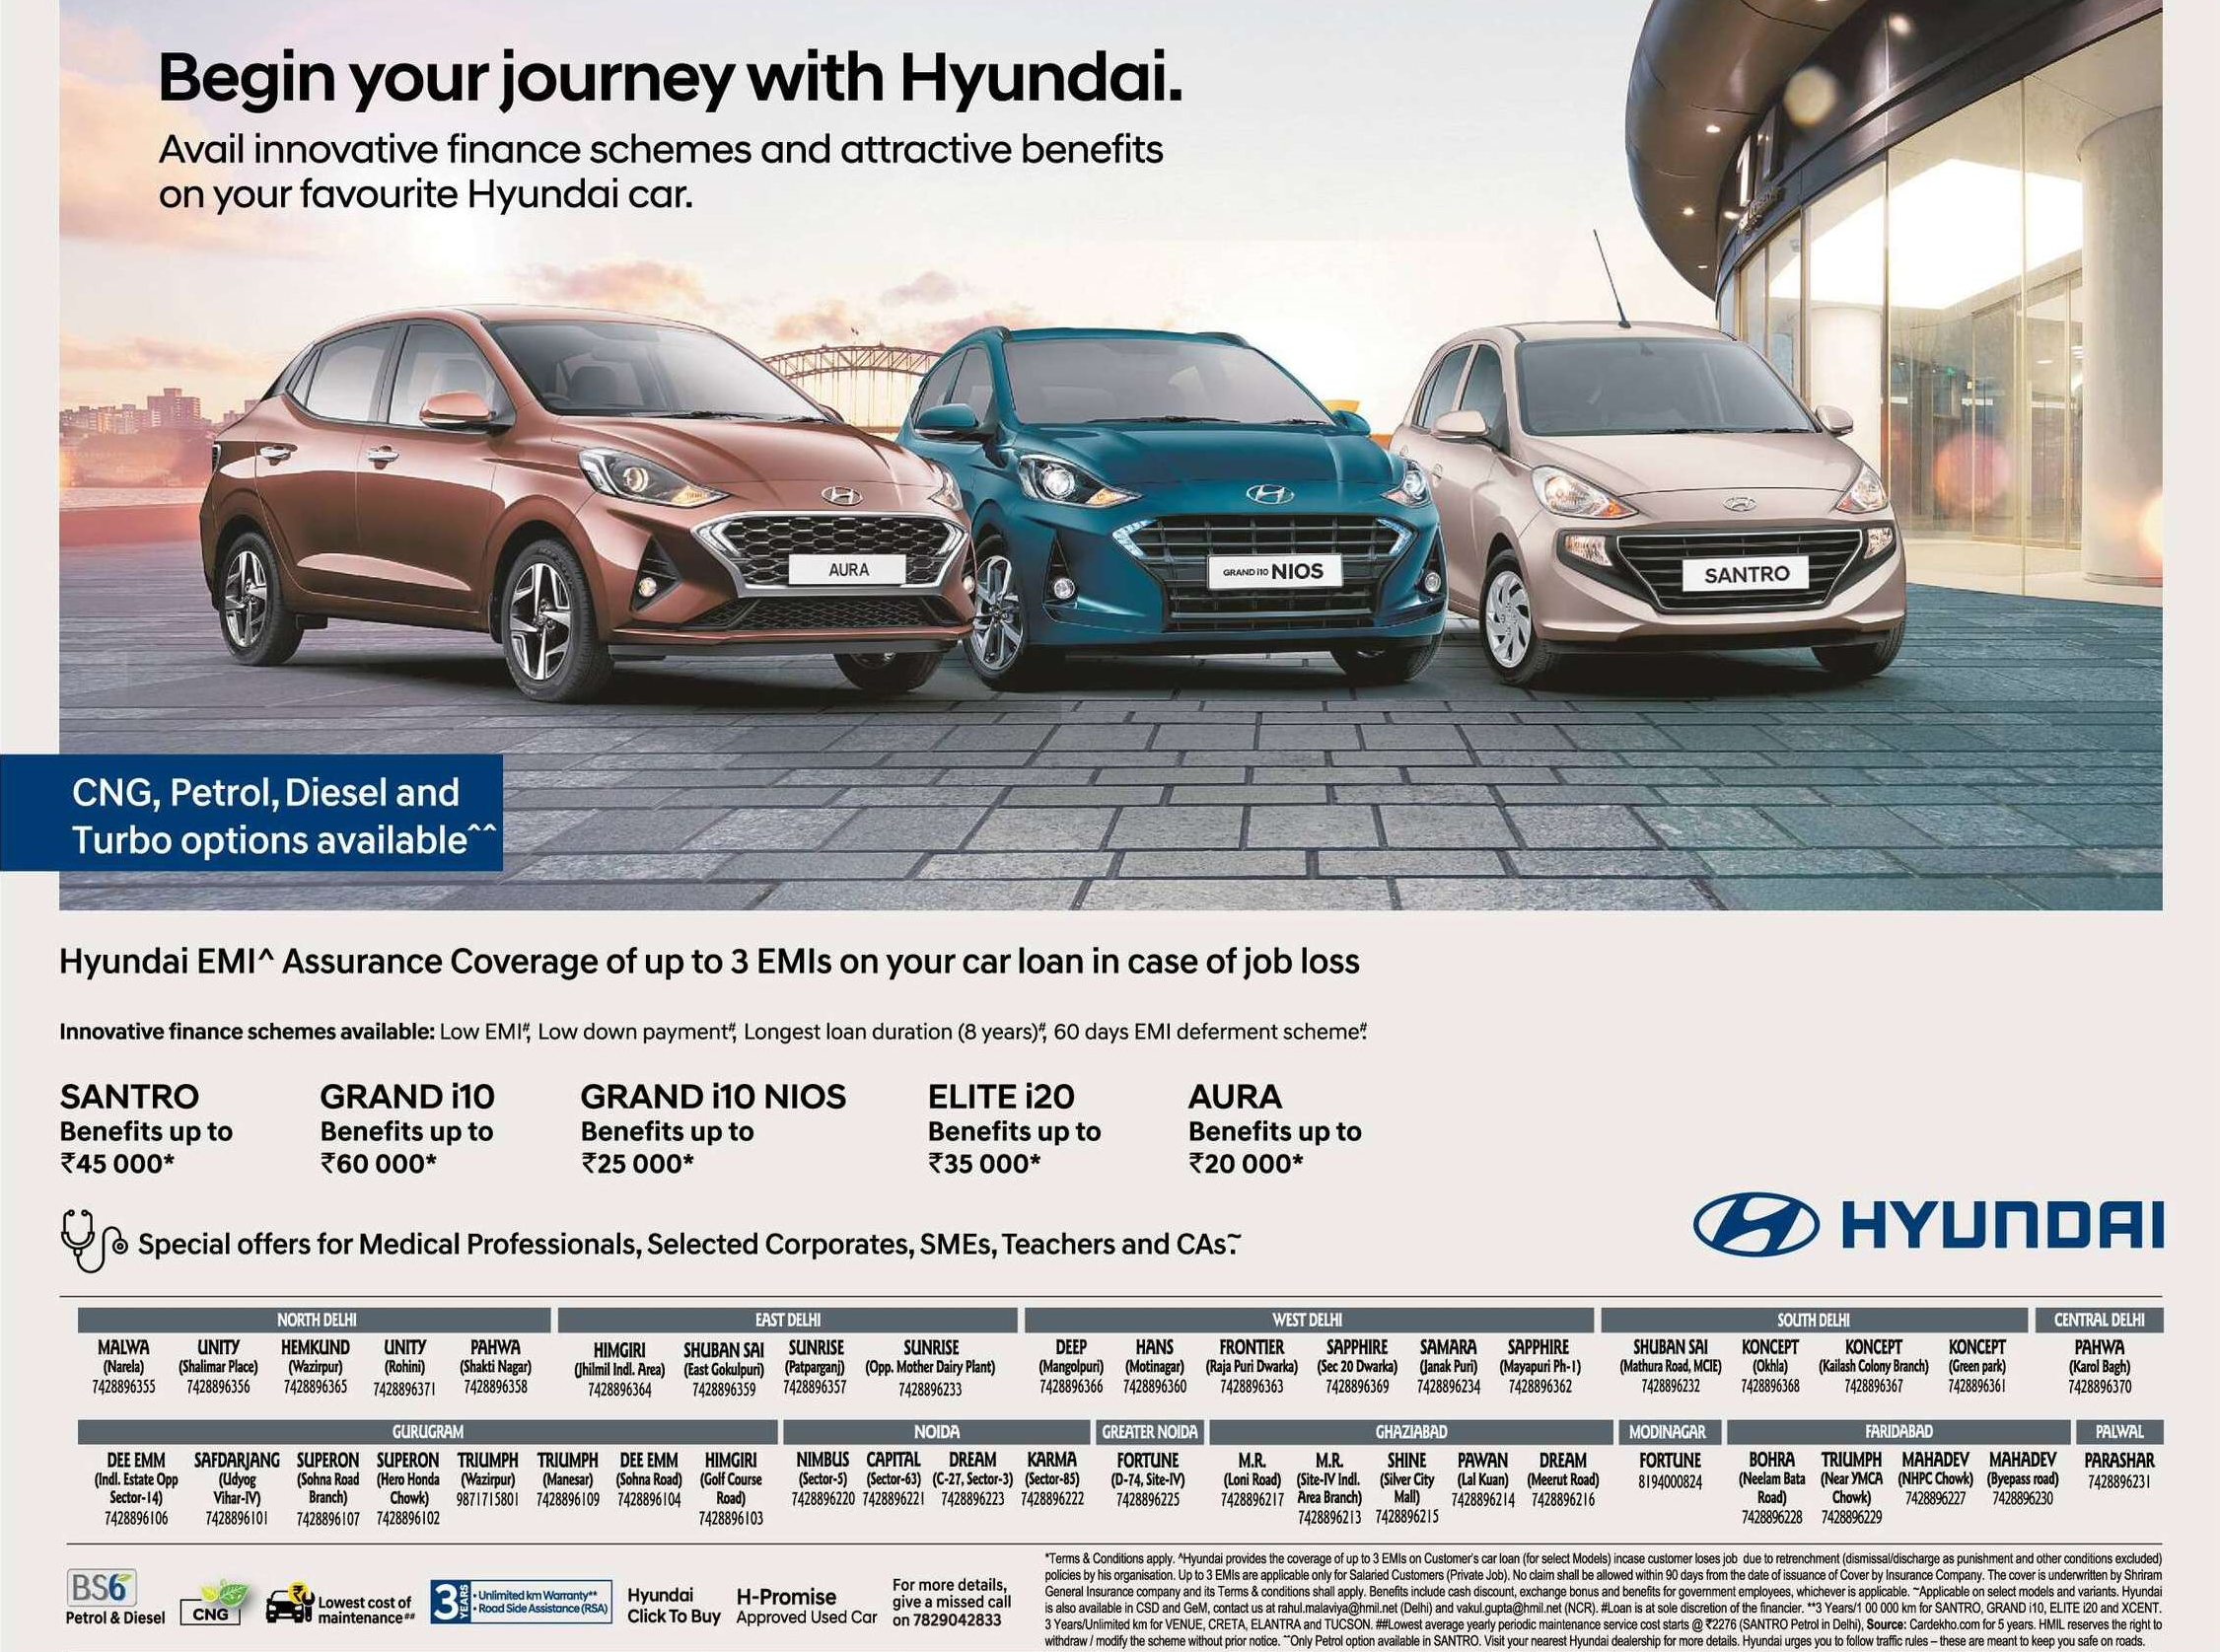 Begin your Journey with Hyundai